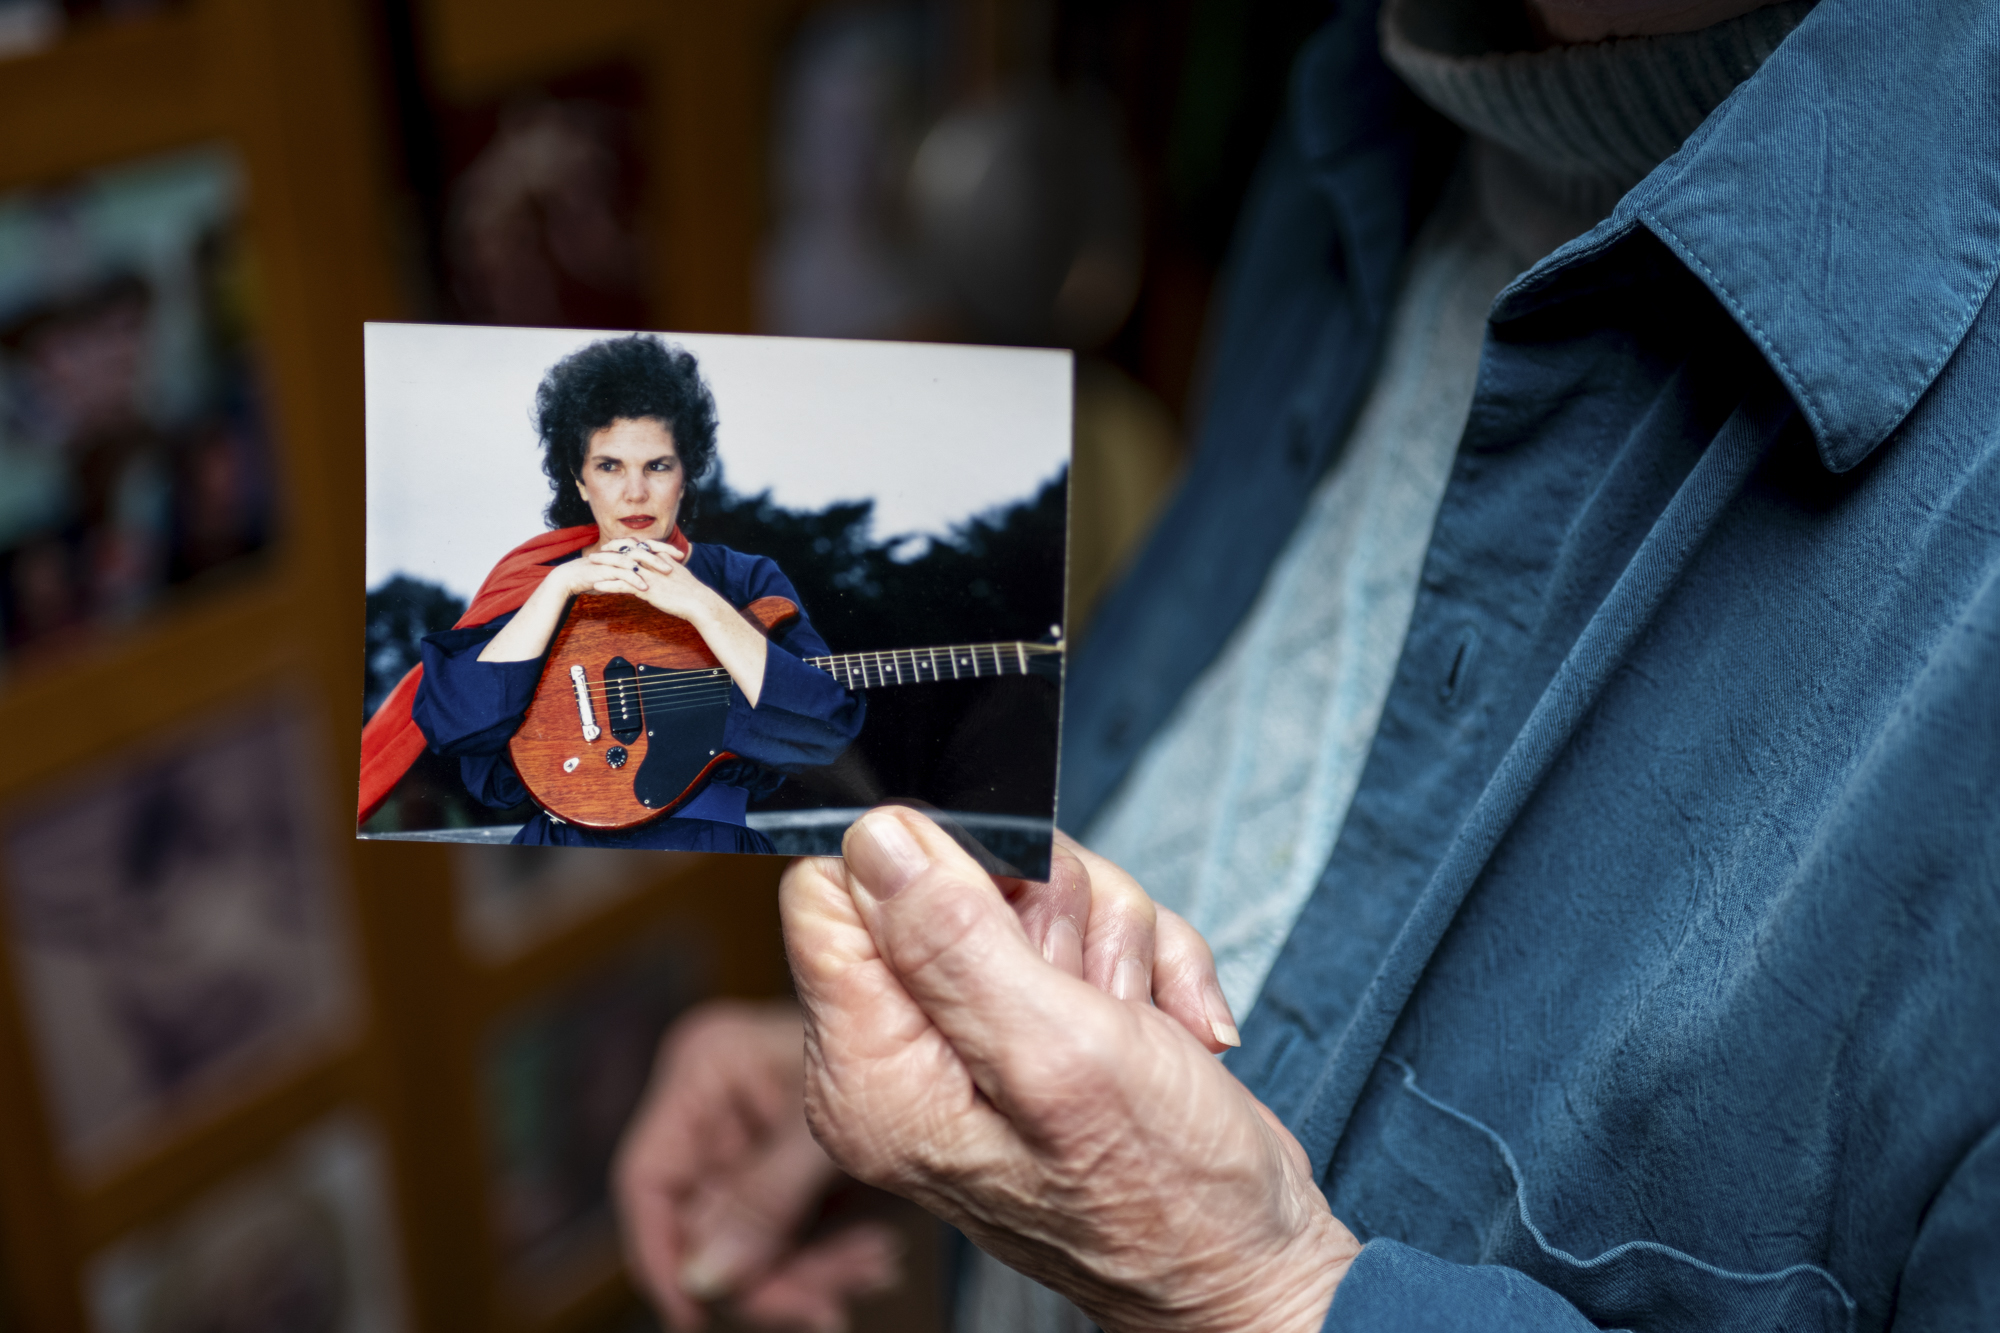 A wrinkled hand holds a photo showing a person holding a guitar.